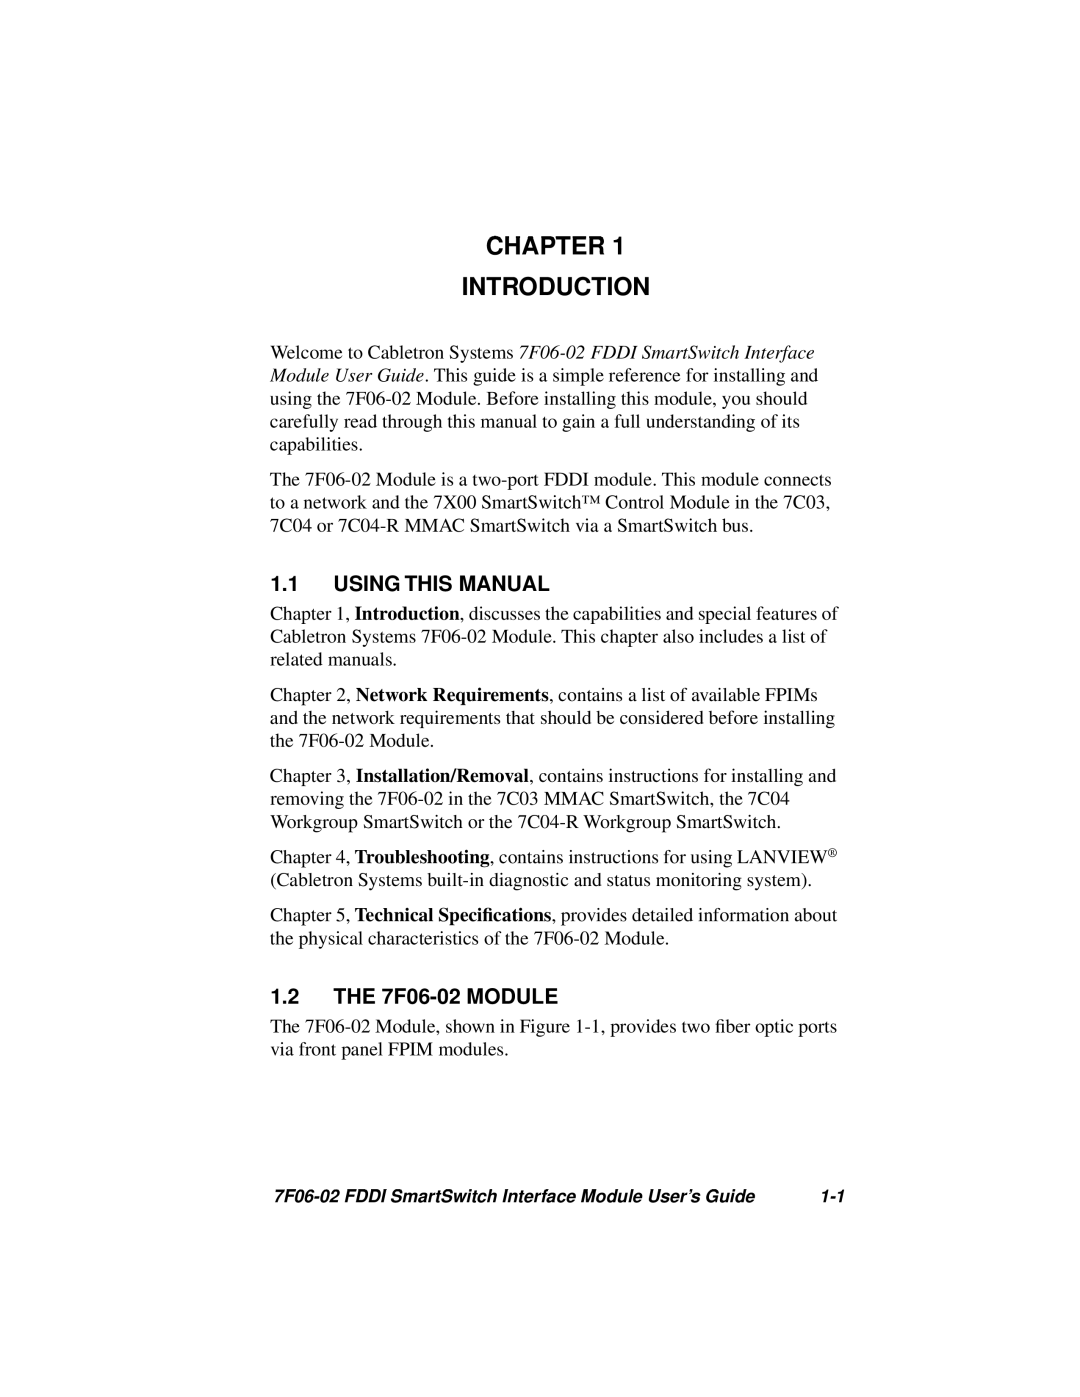 Cabletron Systems FDDI manual Chapter Introduction, Using This Manual, THE 7F06-02 MODULE 